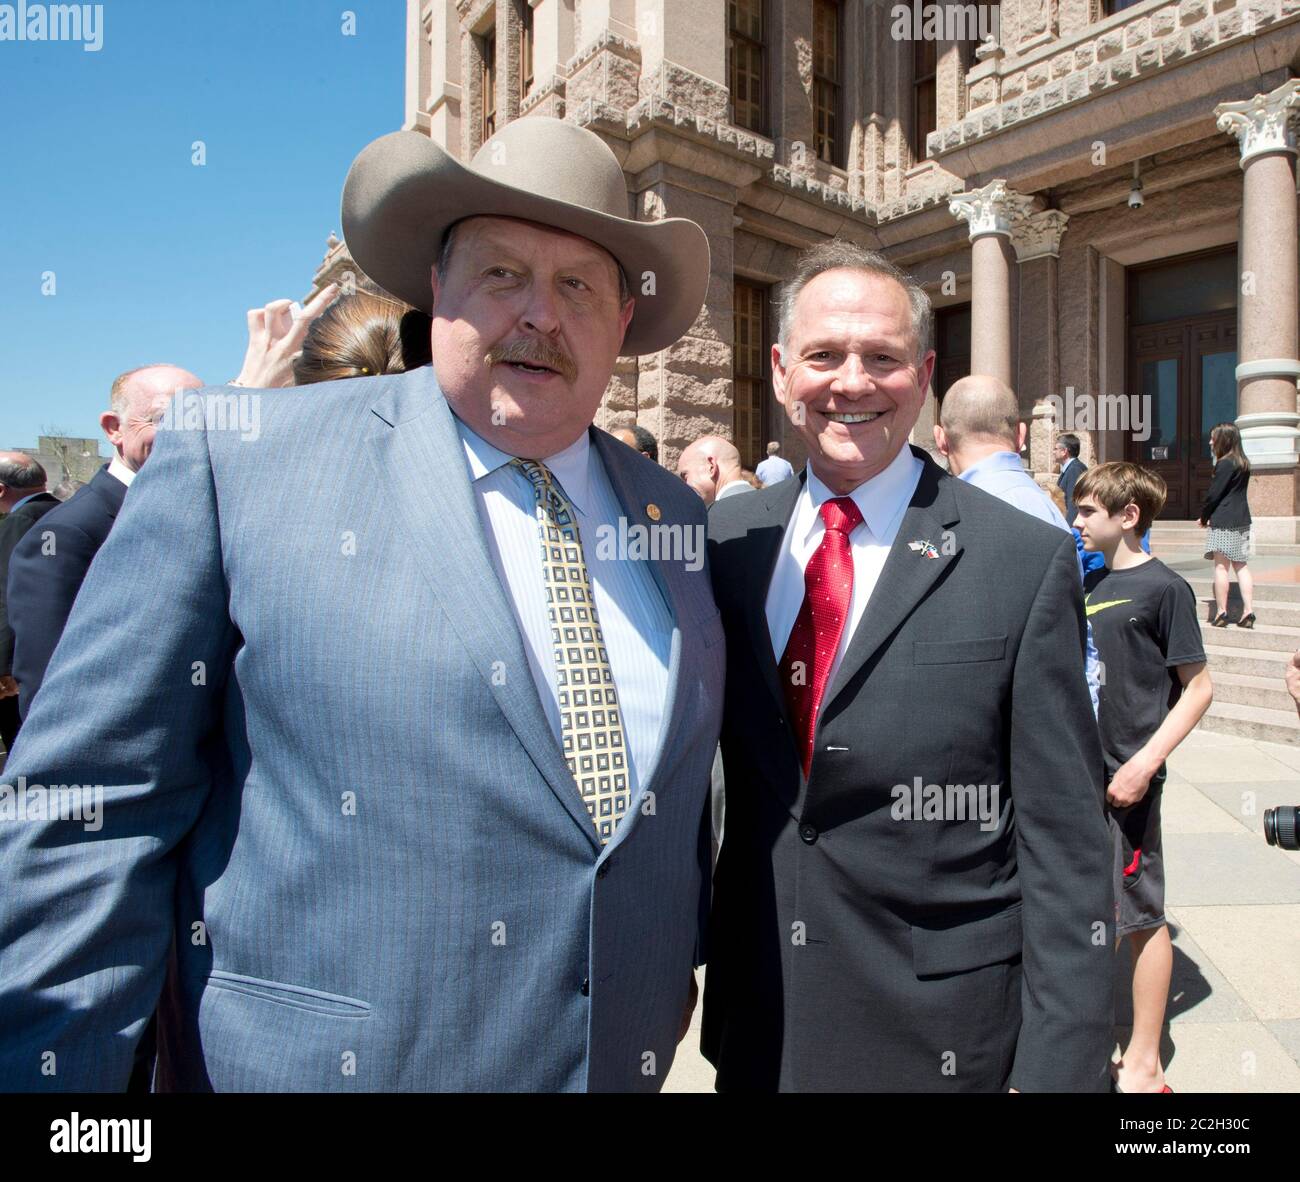 Austin Texas USA, March 24 2015: Controversial Alabama Supreme Court Chief Justice Roy Moore poses with Texas State Rep. Cecil Bell Jr. after speaking alongside conservative Texas legislators opposing gay marriage at a Texas Capitol rally.  Moore has told Alabama judges to ignore a recent federal court ruling allowing gay marriage in the state.   ©Bob Daemmrich Stock Photo